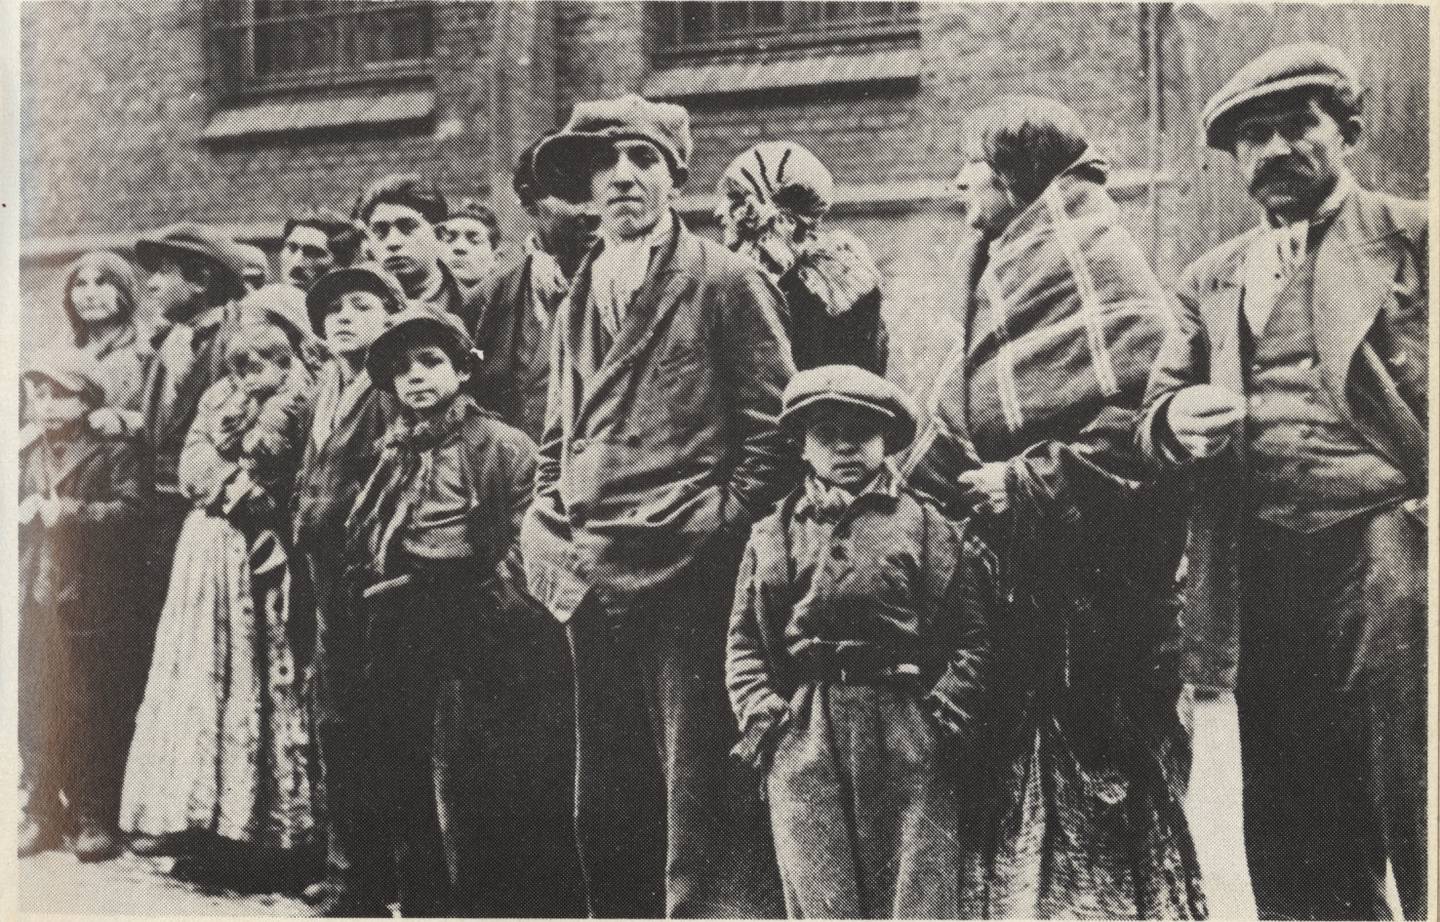 68 Roman-Norwegians were prevented from entering Norway in 1934. The photo shows the group before they were deported from Badburg in Denmark to Germany, where they were detained in the first 